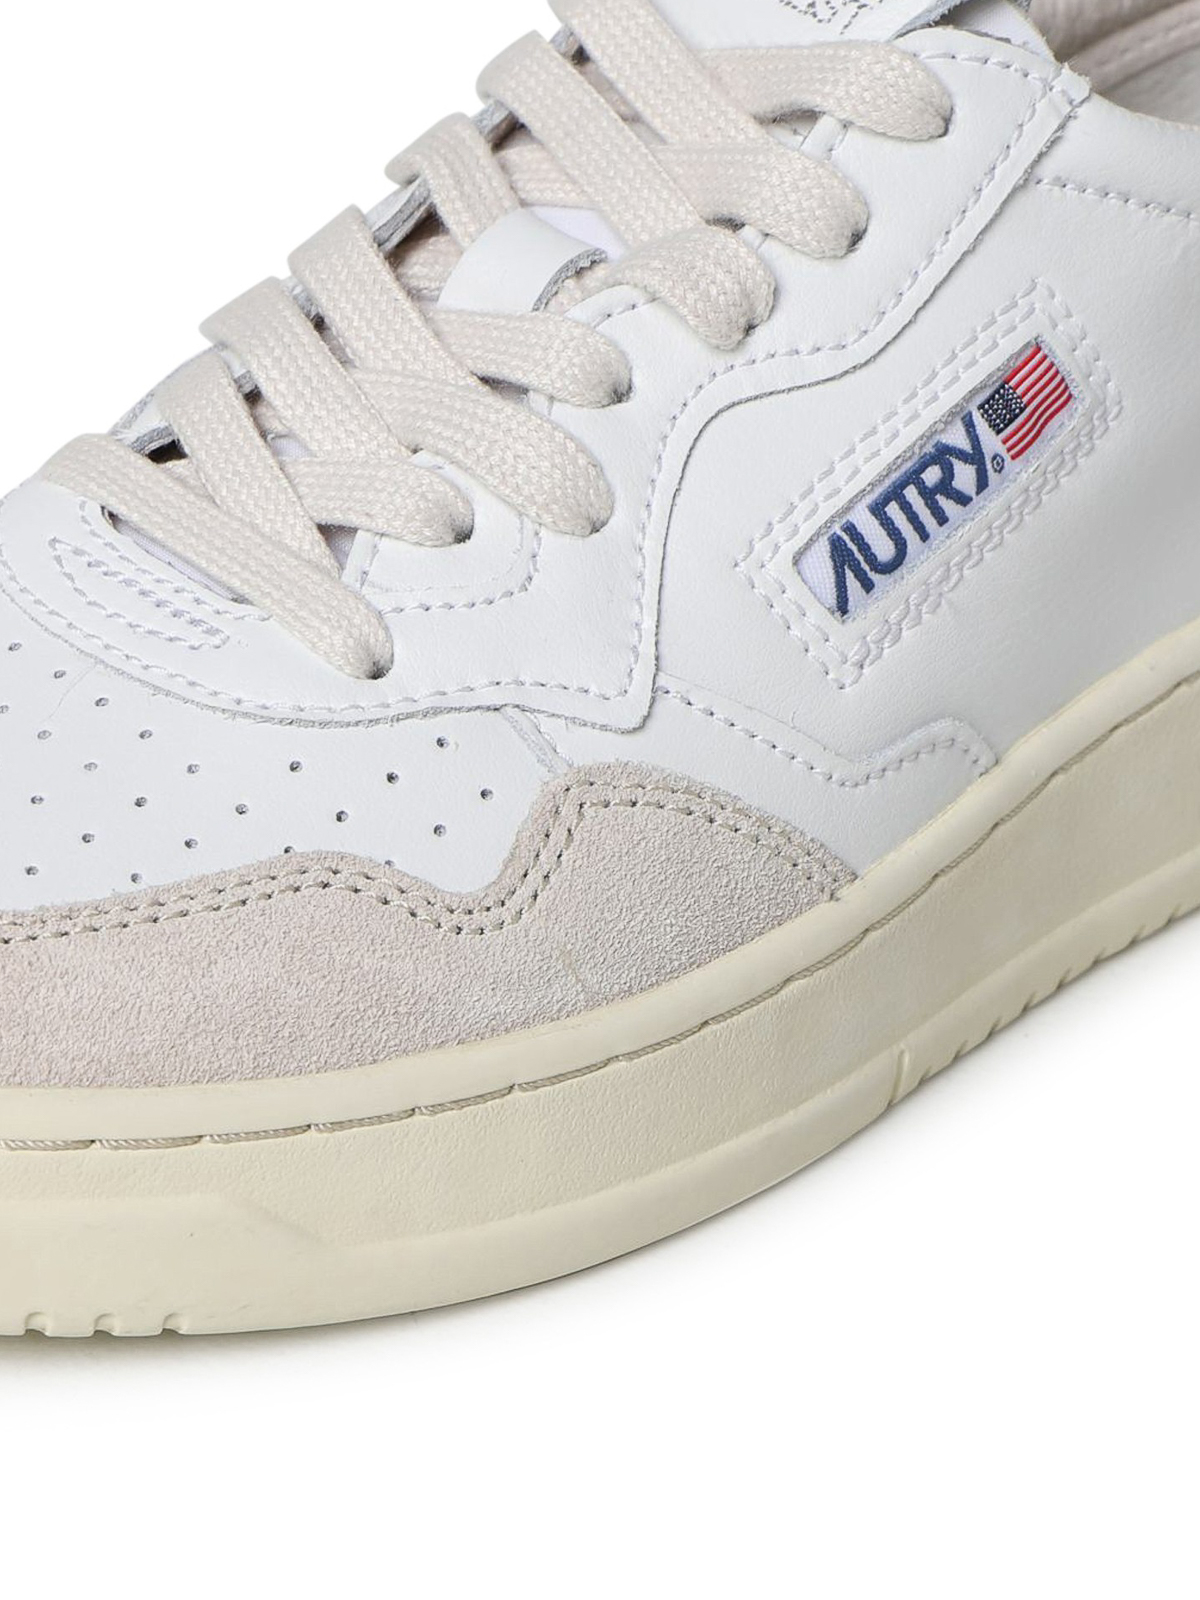 Shop Autry Medalist Leather Sneakers With Suede Details In White